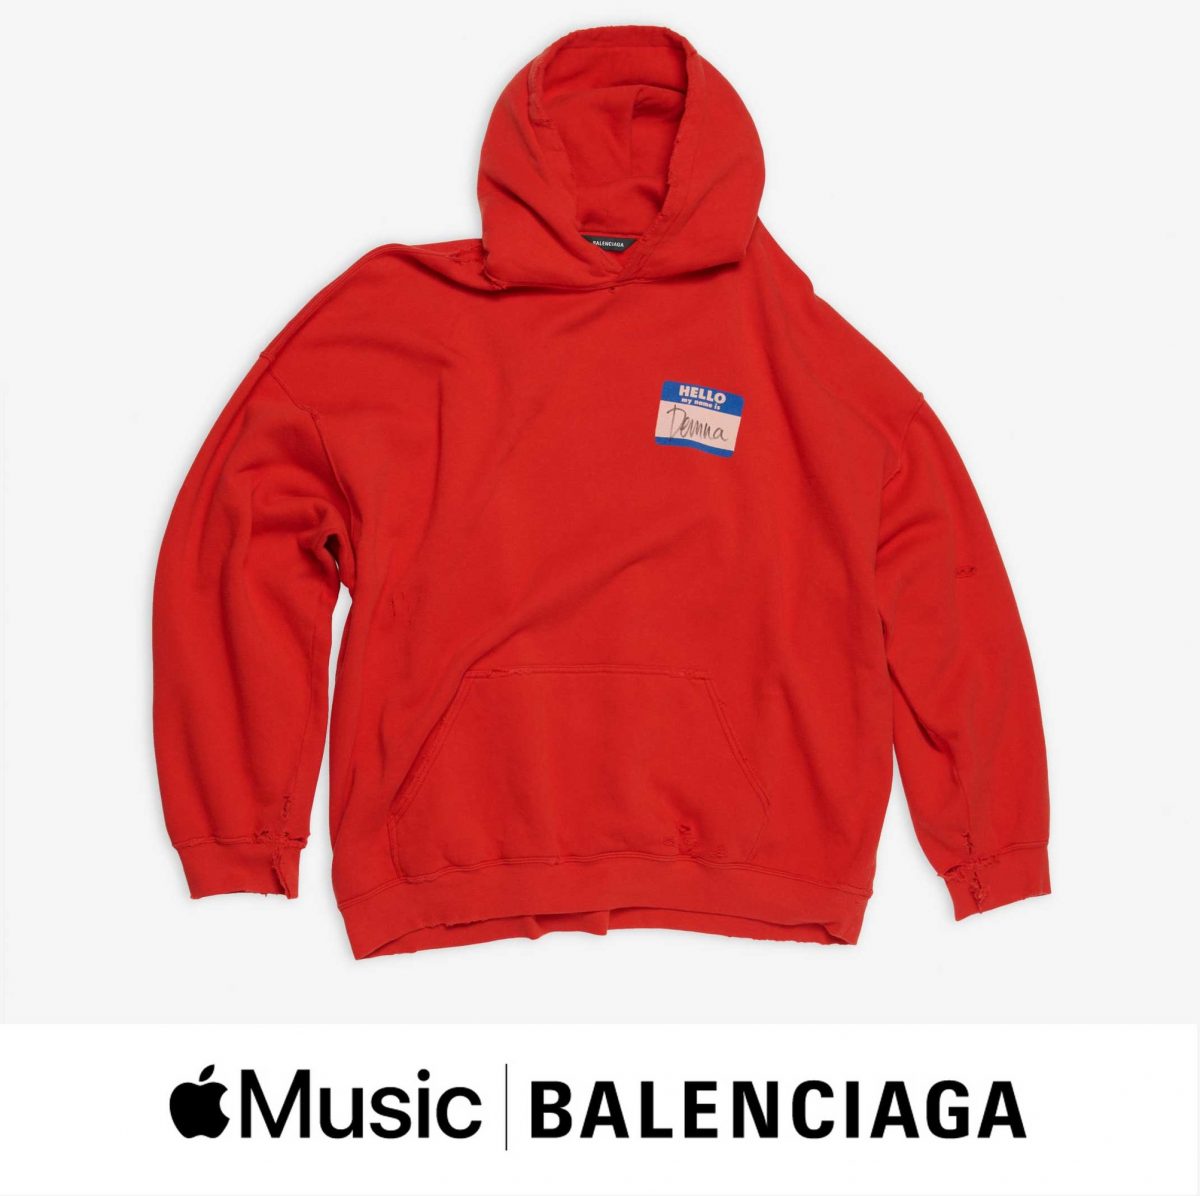 Balenciaga joins the ranks of Apple will curate exclusive playlists | Esquire Middle East – The Region's Best Men's Magazine